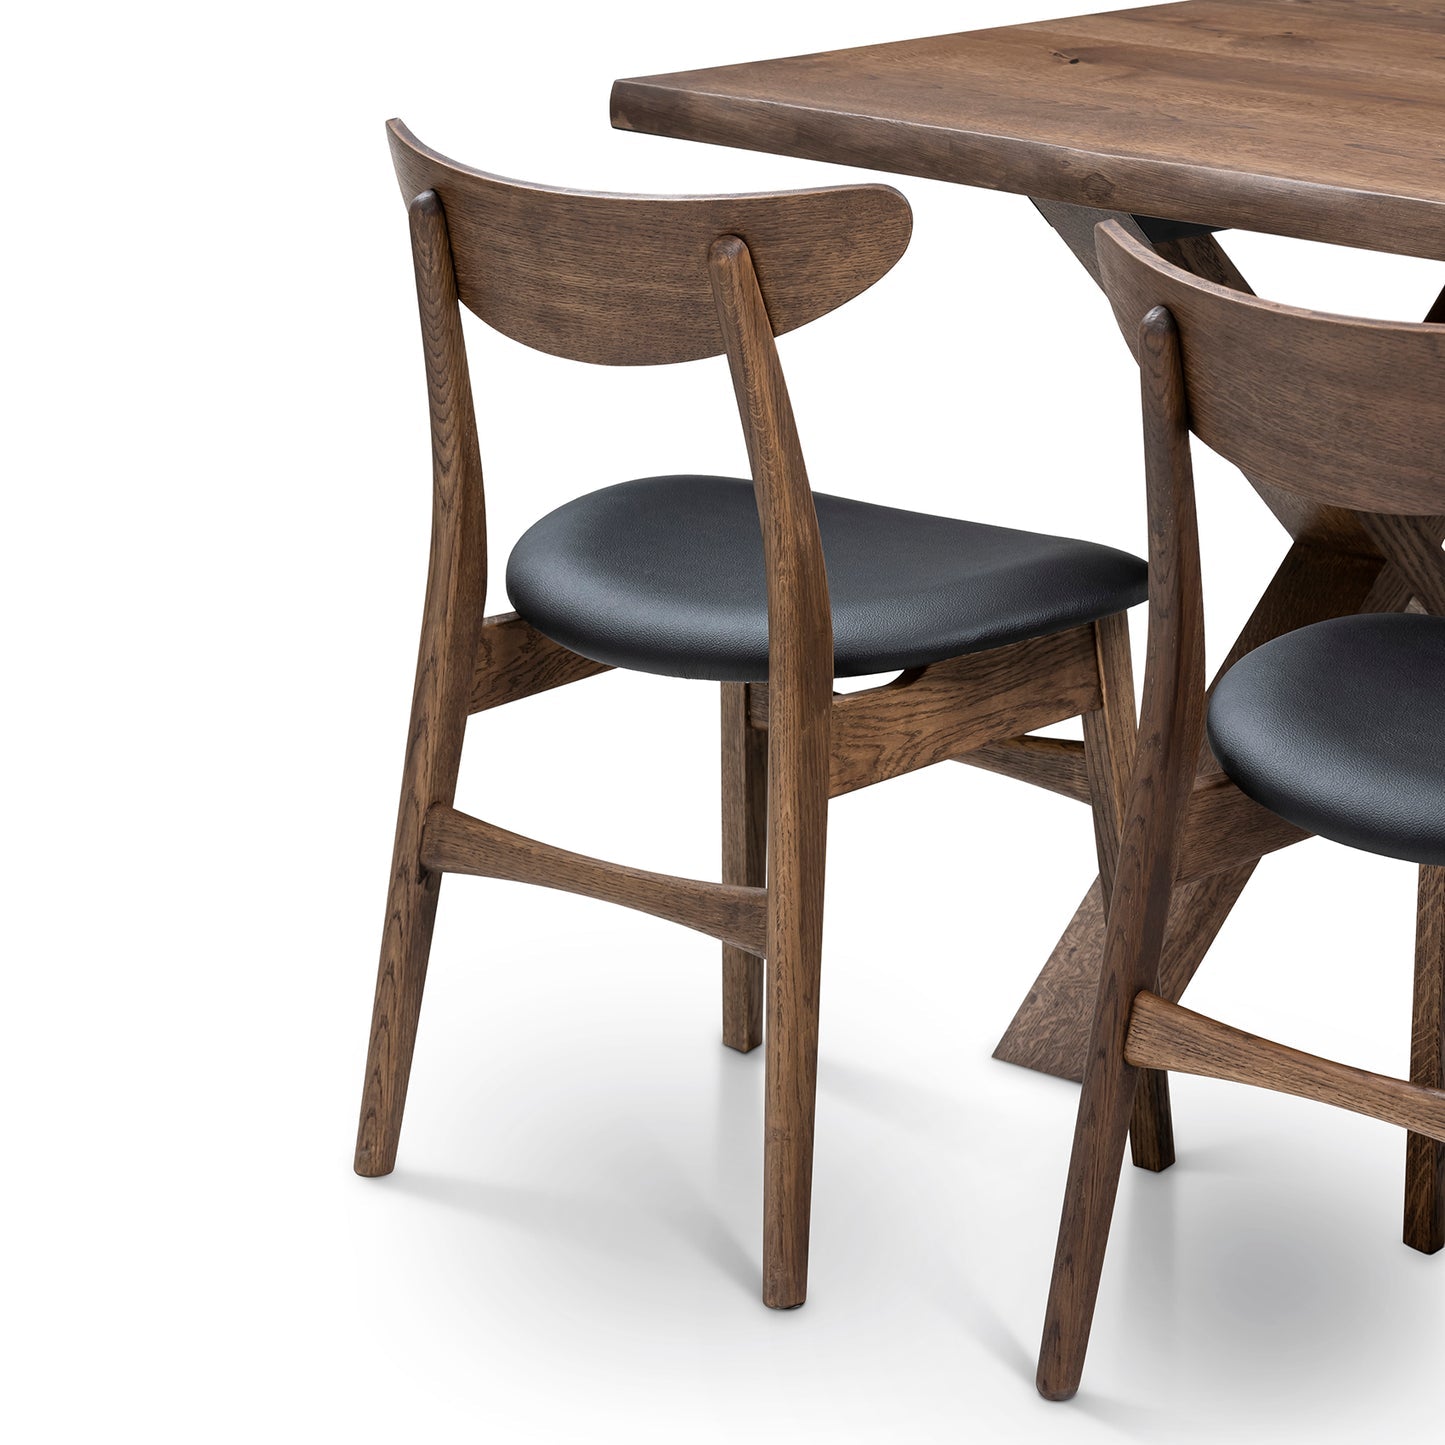 Eva Extendable Dining Table in Chocolate Oak by S10Home